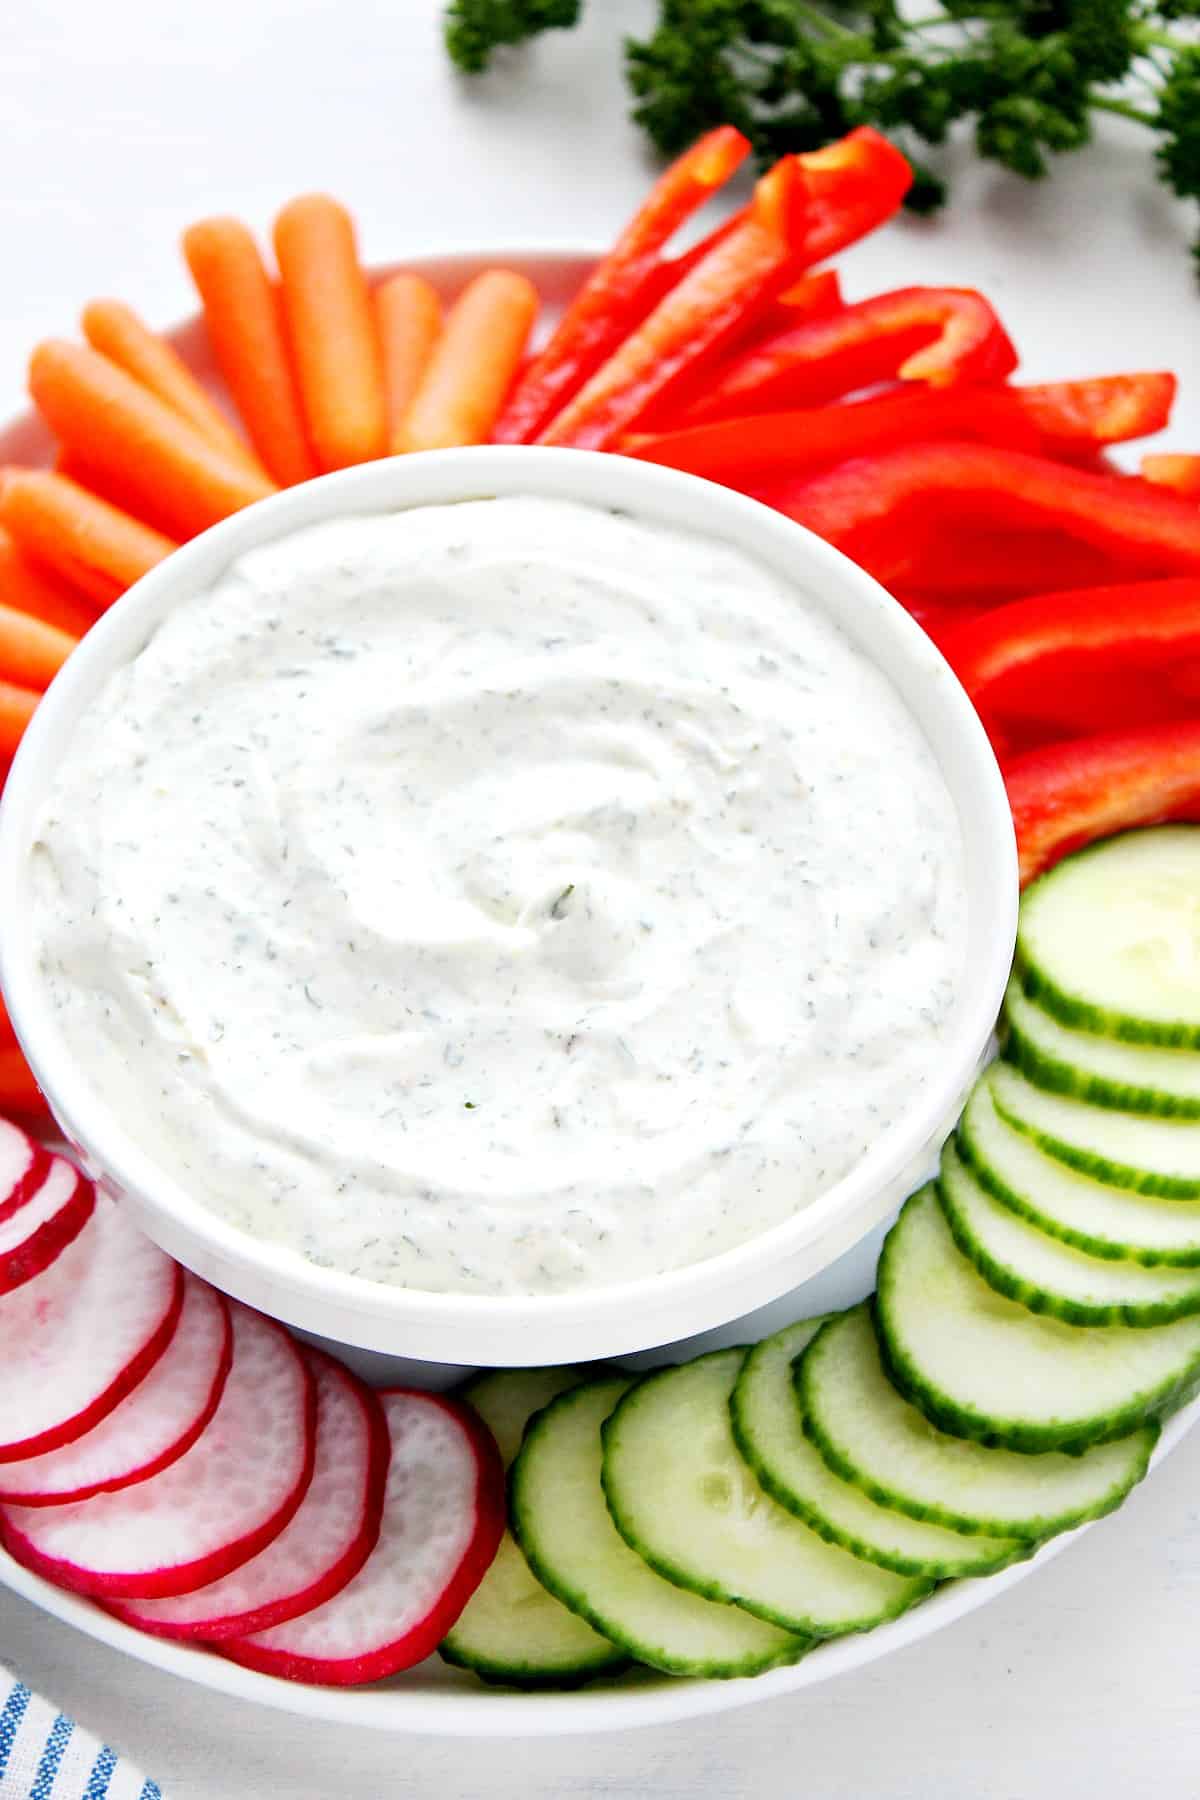 Dip in a bowl with veggies on plate.